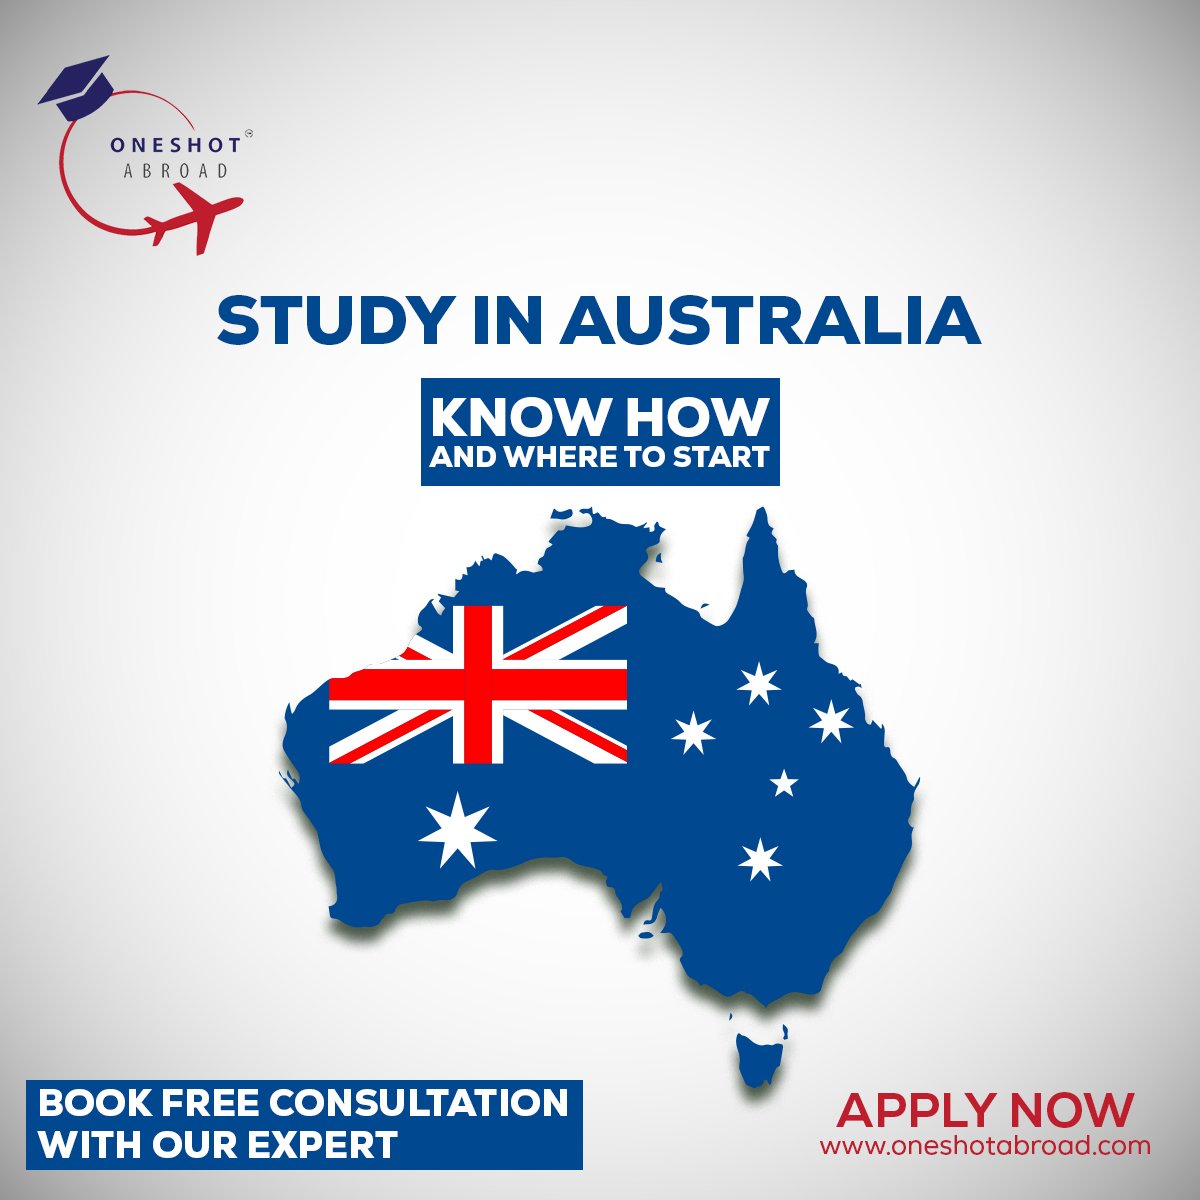 Gain Work Experience while you Study!
Study in Australia.

Enroll Now @oneshotabroad 

#studyincanada #studyinuk #studyinusa #studyabroad #studyinaustralia #expertcounsellor #expertcounselling #studyabroadconsultants #australia #education #oneshotabroad #admission #admissionopen